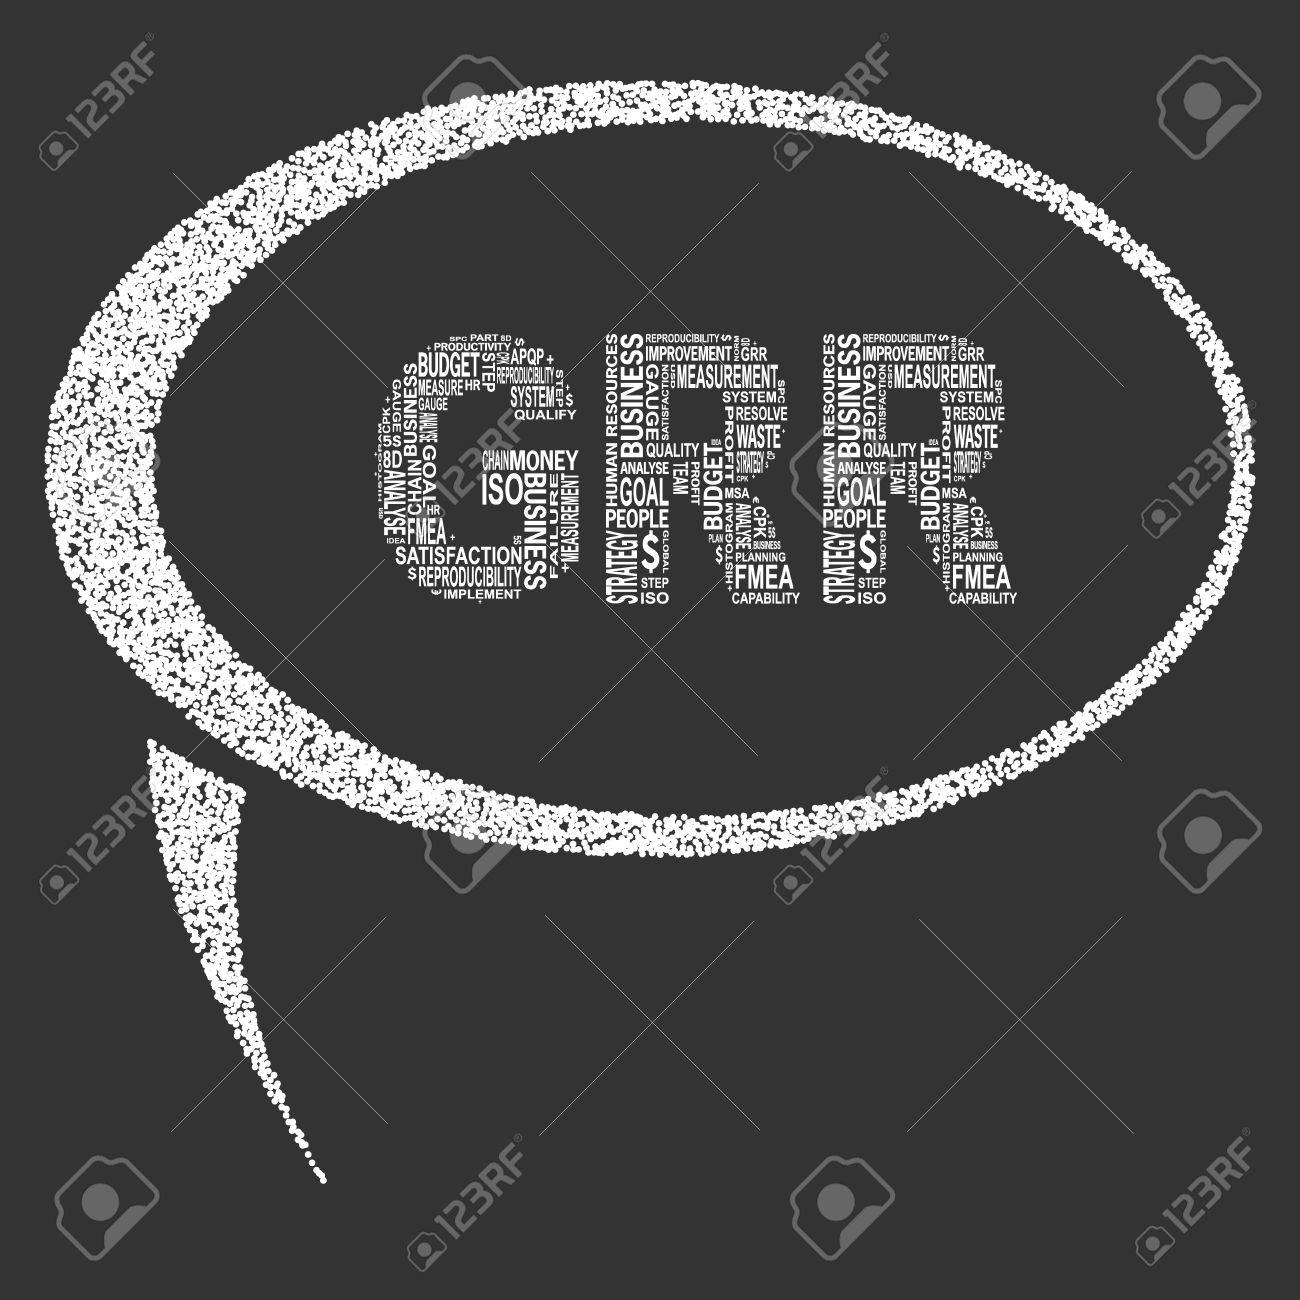 Gauge Repeatability And Reproducibility Typography Speech Bubble